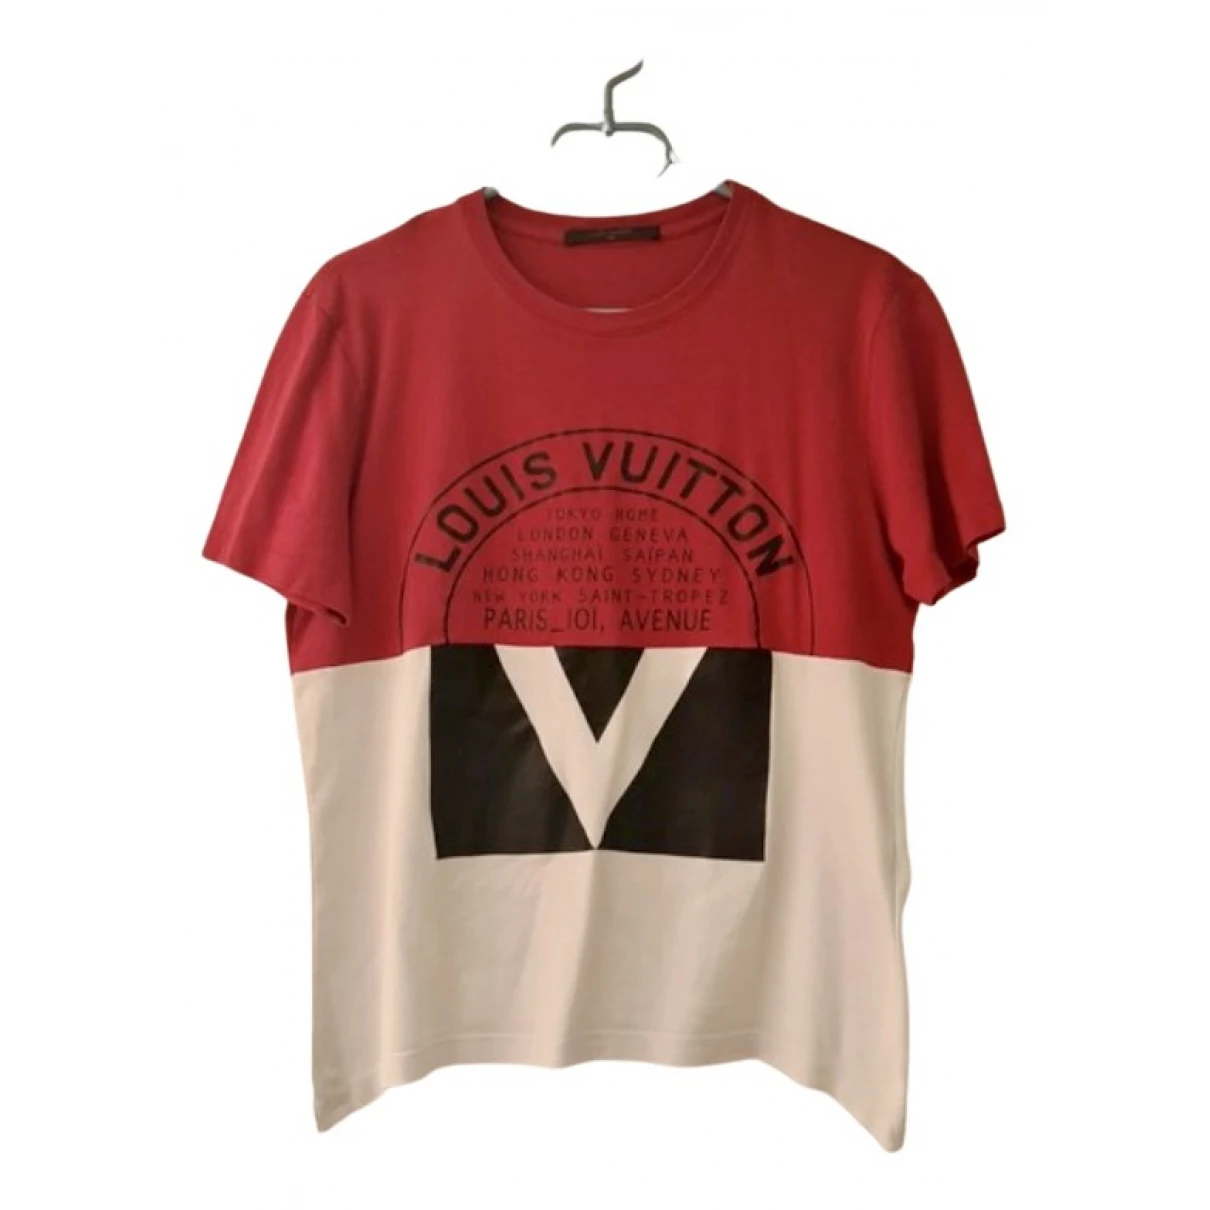 clothing Louis Vuitton t-shirts for Male Cotton S International. Used condition